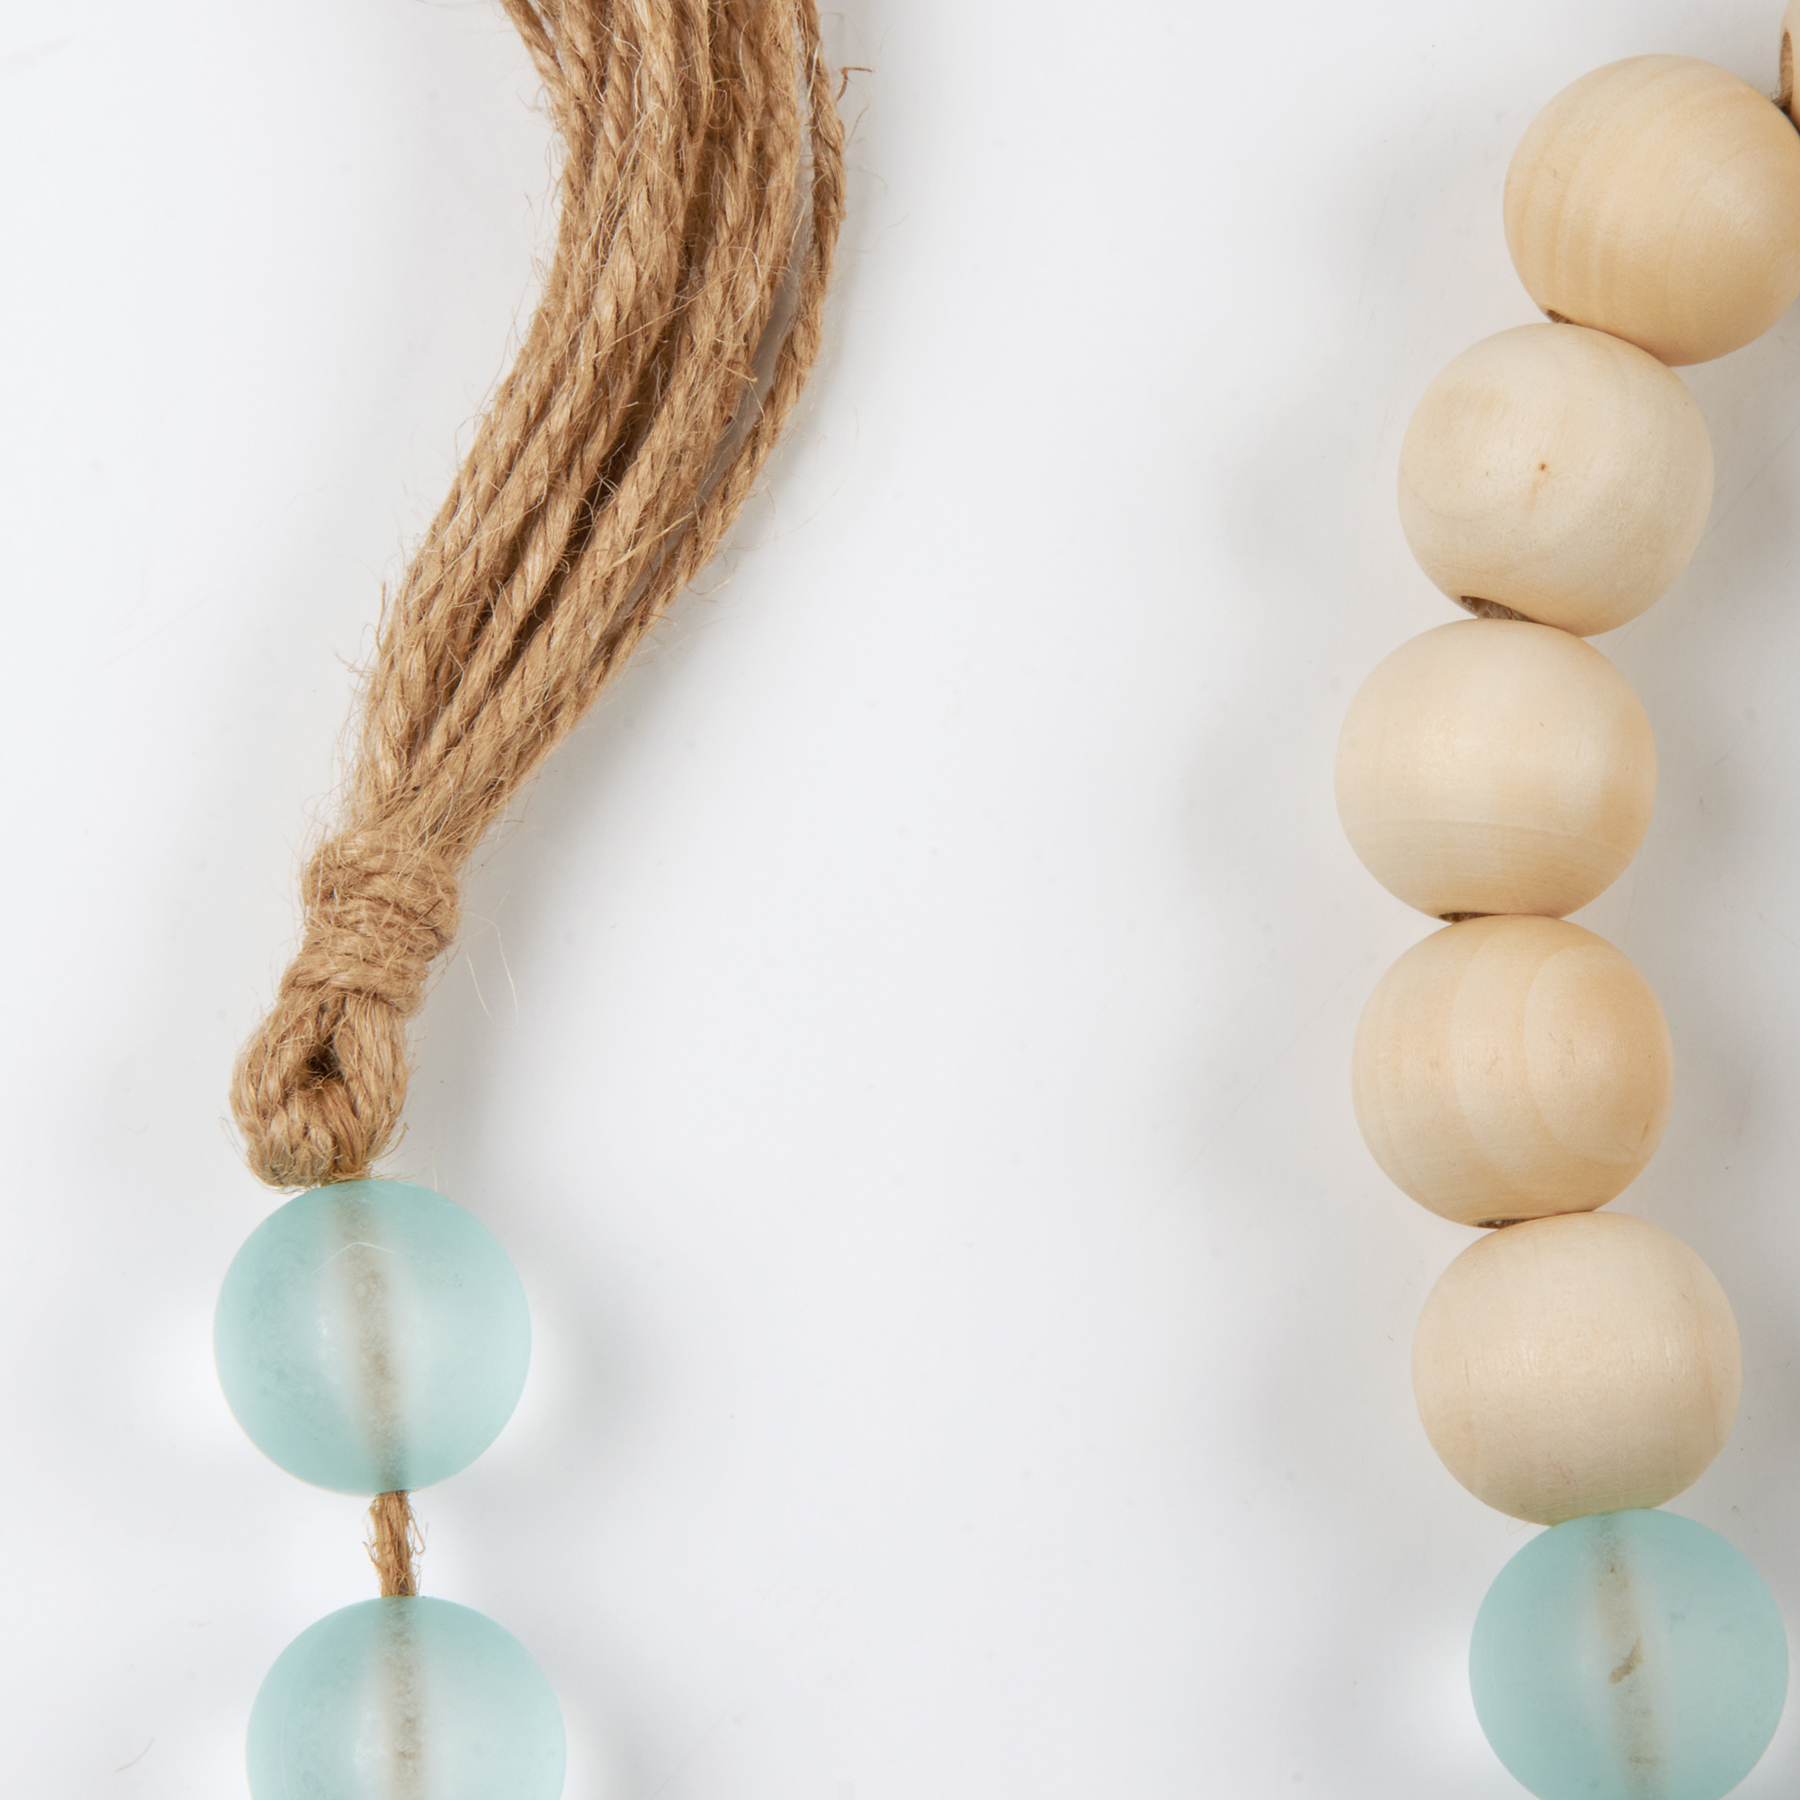 Accessorizing with glass and wooden bead strands + sources